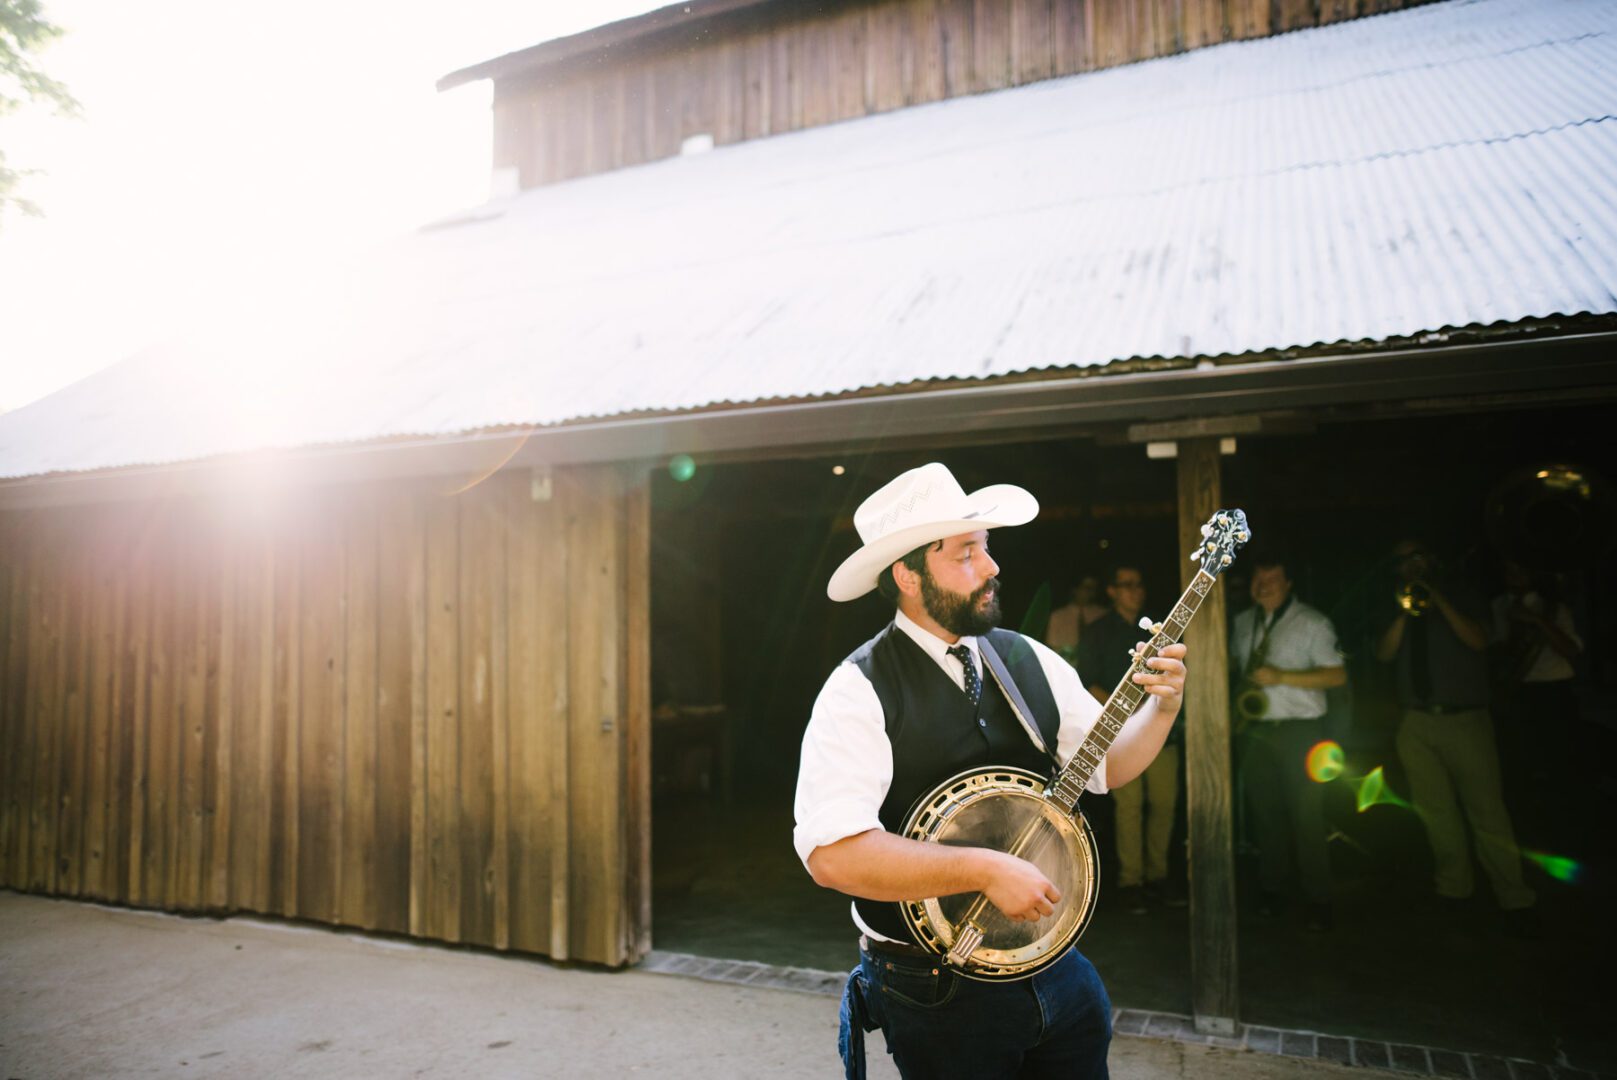 A man playing a banjo in front of a barn.